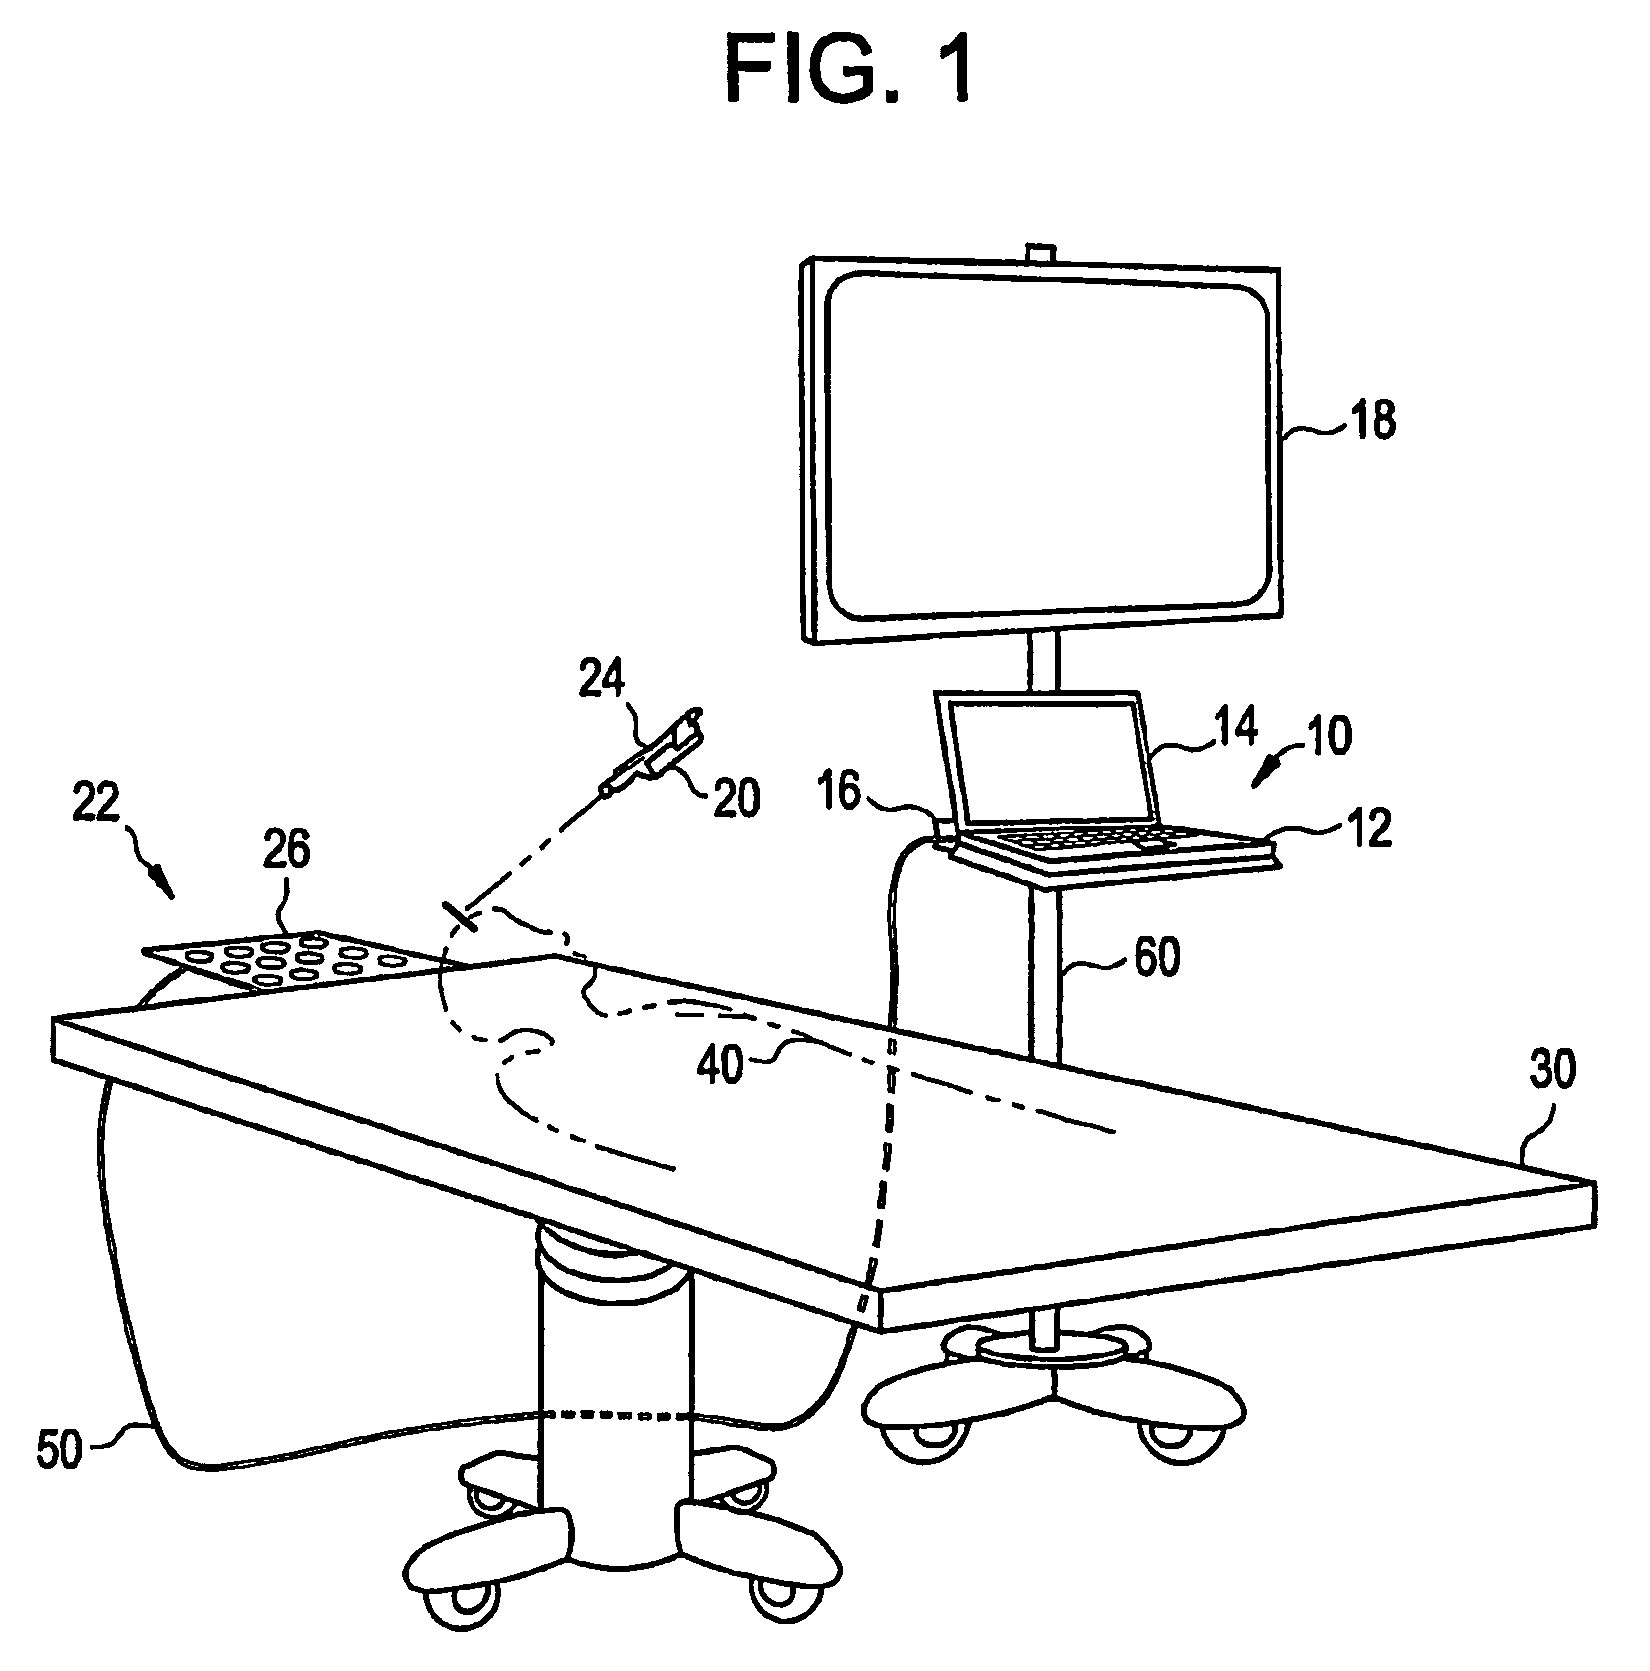 Systems and methods for automated tracker-driven image selection